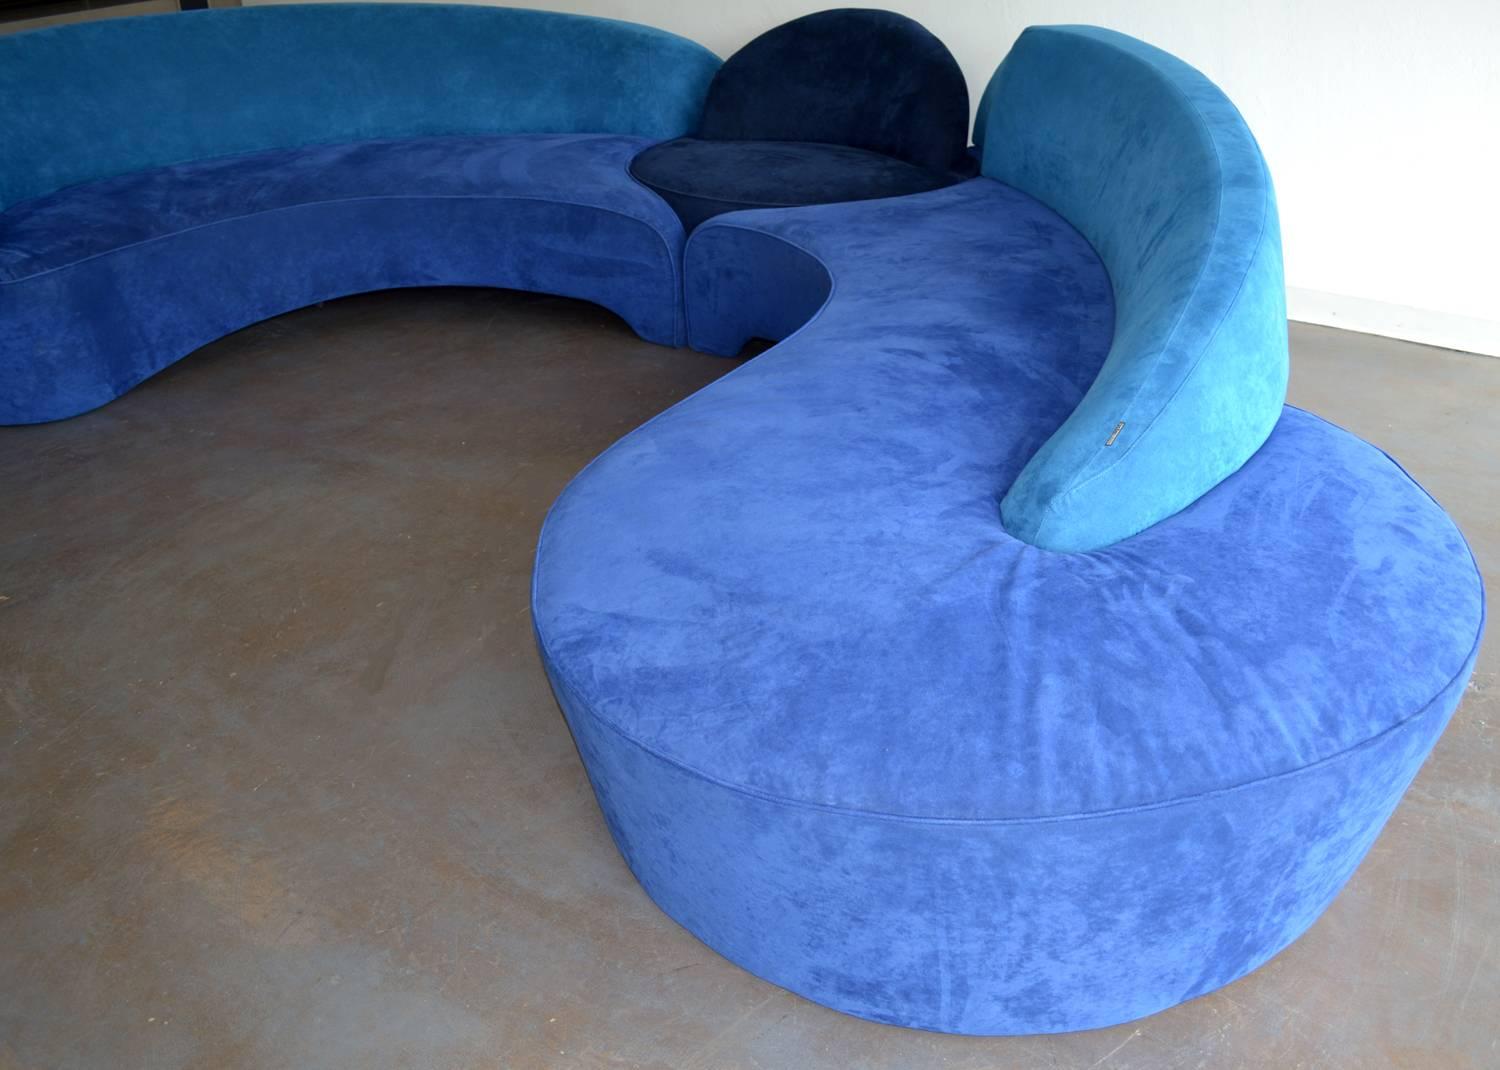 Two rare asymmetric 'Comete' sofas with central circular ottoman designed by Vladimir Kagan for Roche Bobois, 2003. Suede upholstery in shades of azure, navy and royal blue. Two large sections pivot the ottoman to form an 18-foot sofa. Imported from